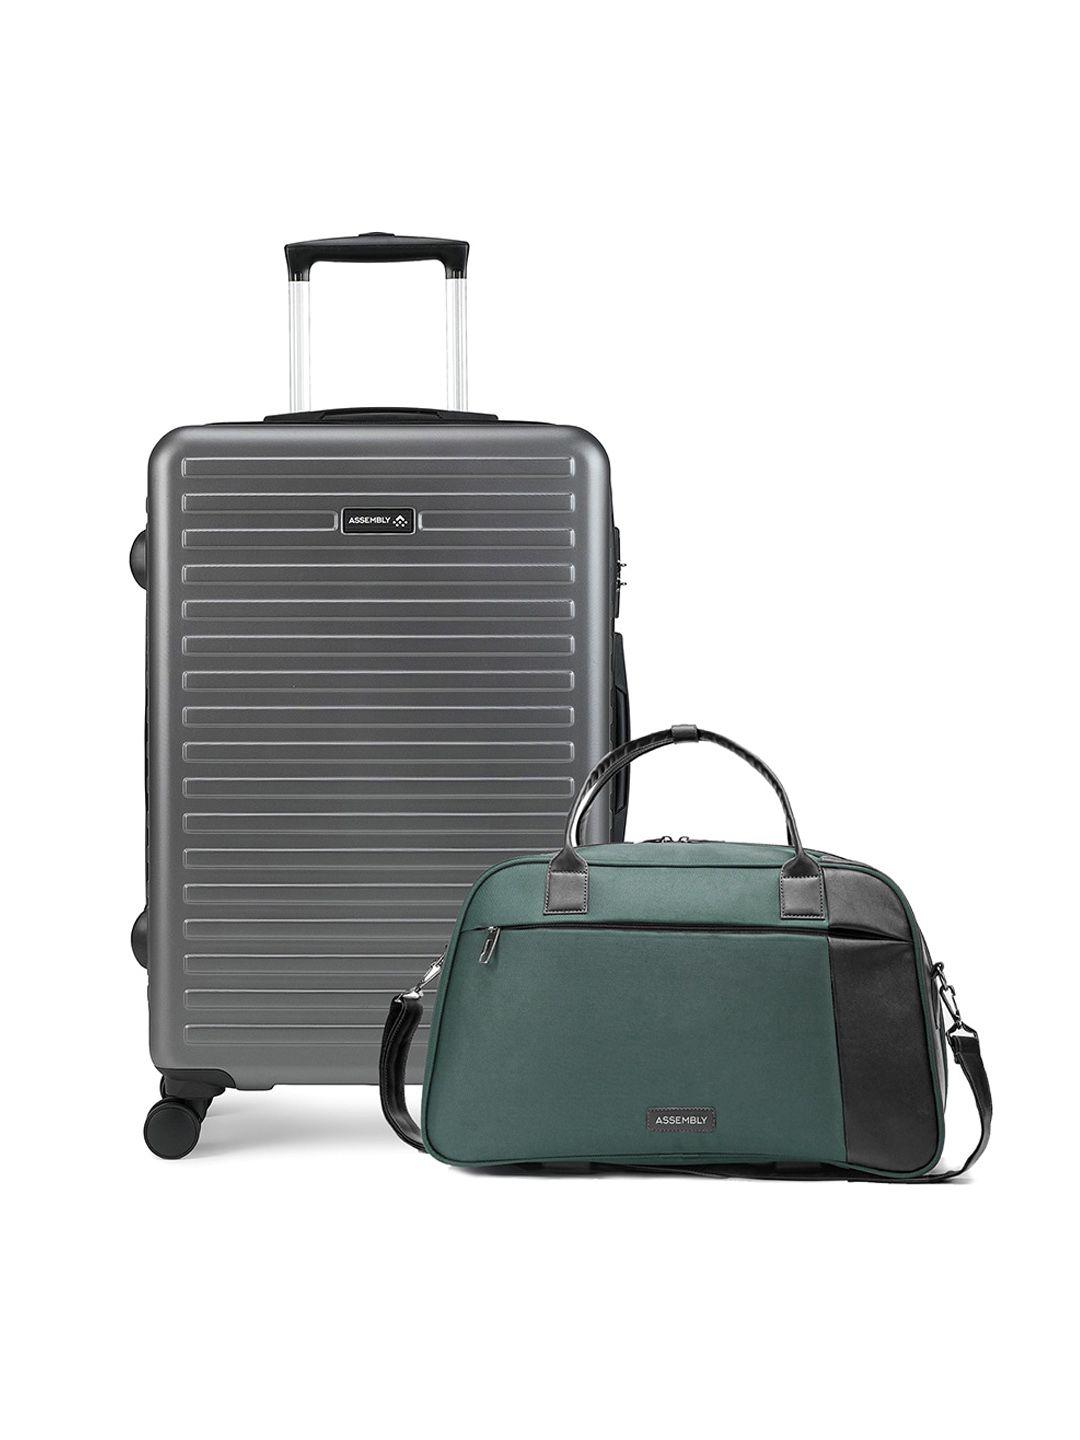 assembly-medium-checkin-24-inch-hard-trolley-luggage-with-weekender-duffle-bag-38l